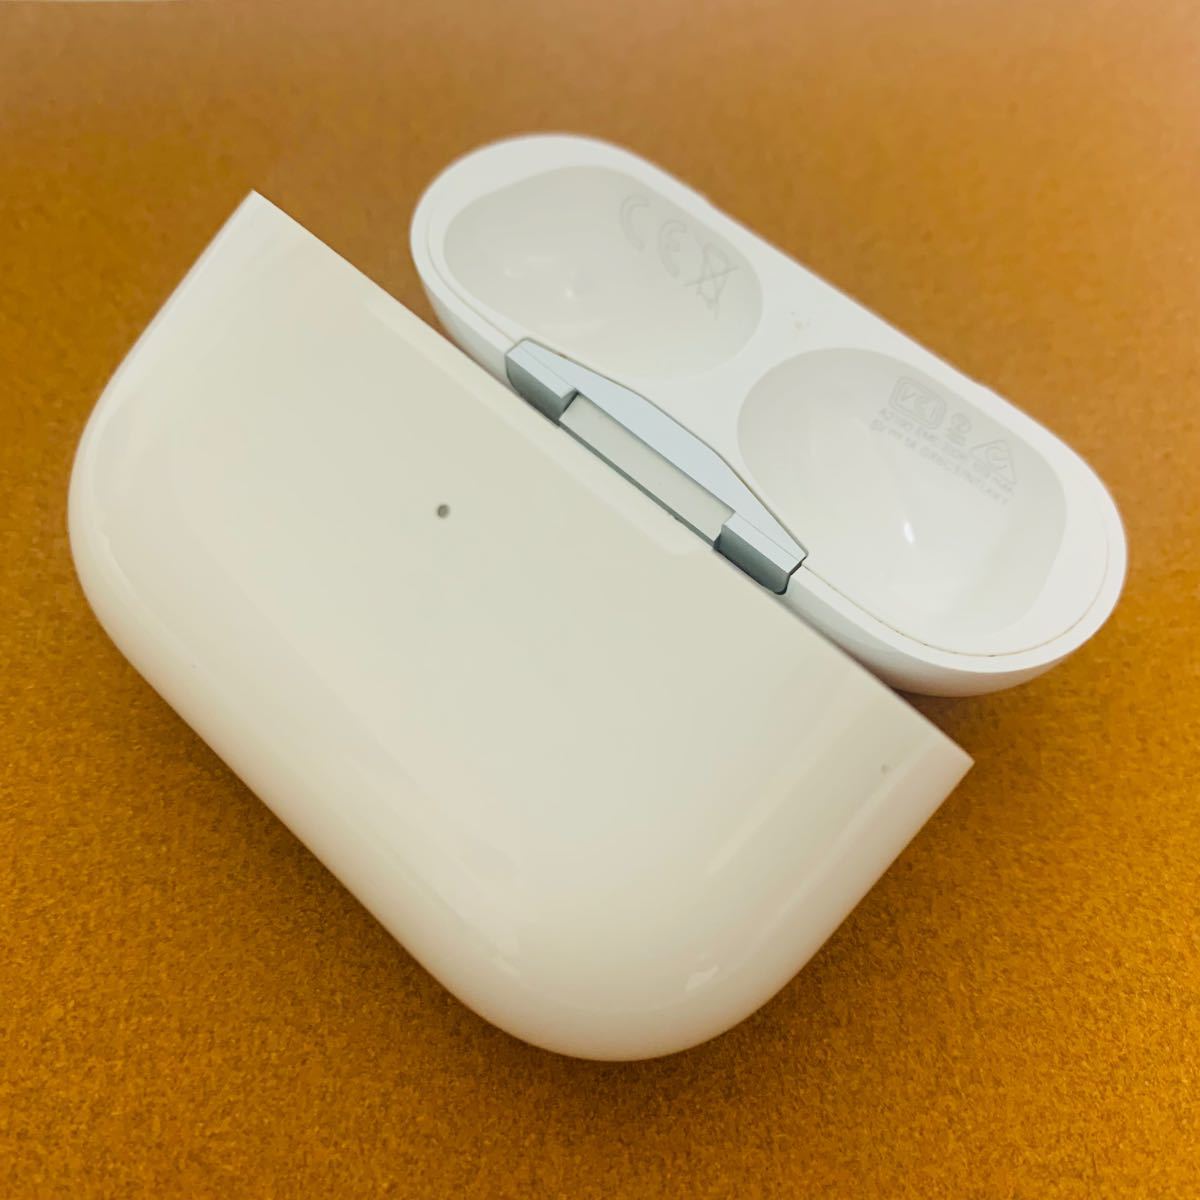 Apple AirPods ワイヤレス充電ケース　エアーポッズ 充電器